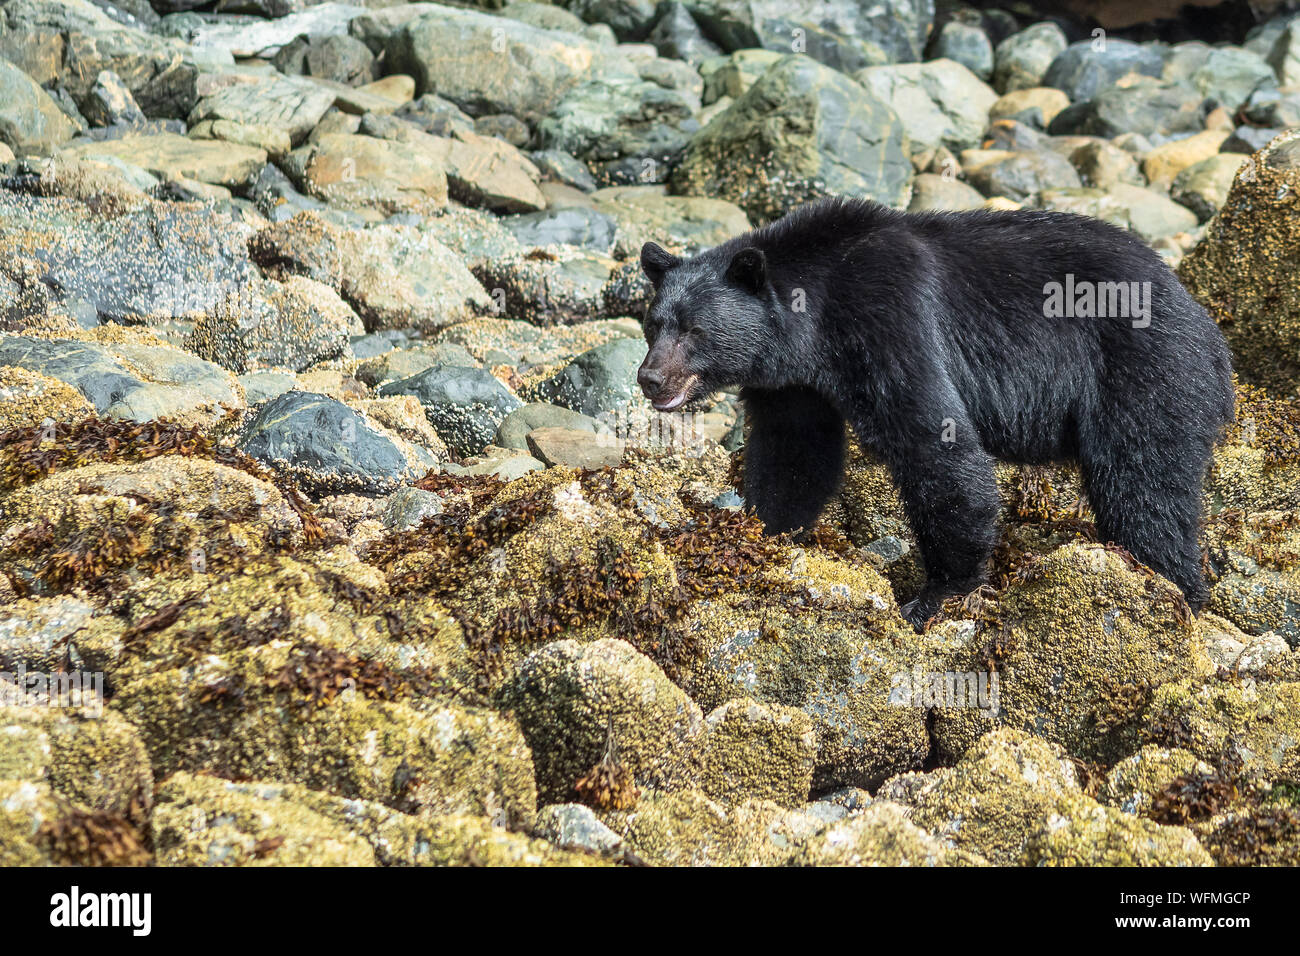 Vancouver Island black bears are found throughout the Pacific Rim National Park Reserve near the towns of Tofino and Ucluelet, British Columbia. Stock Photo